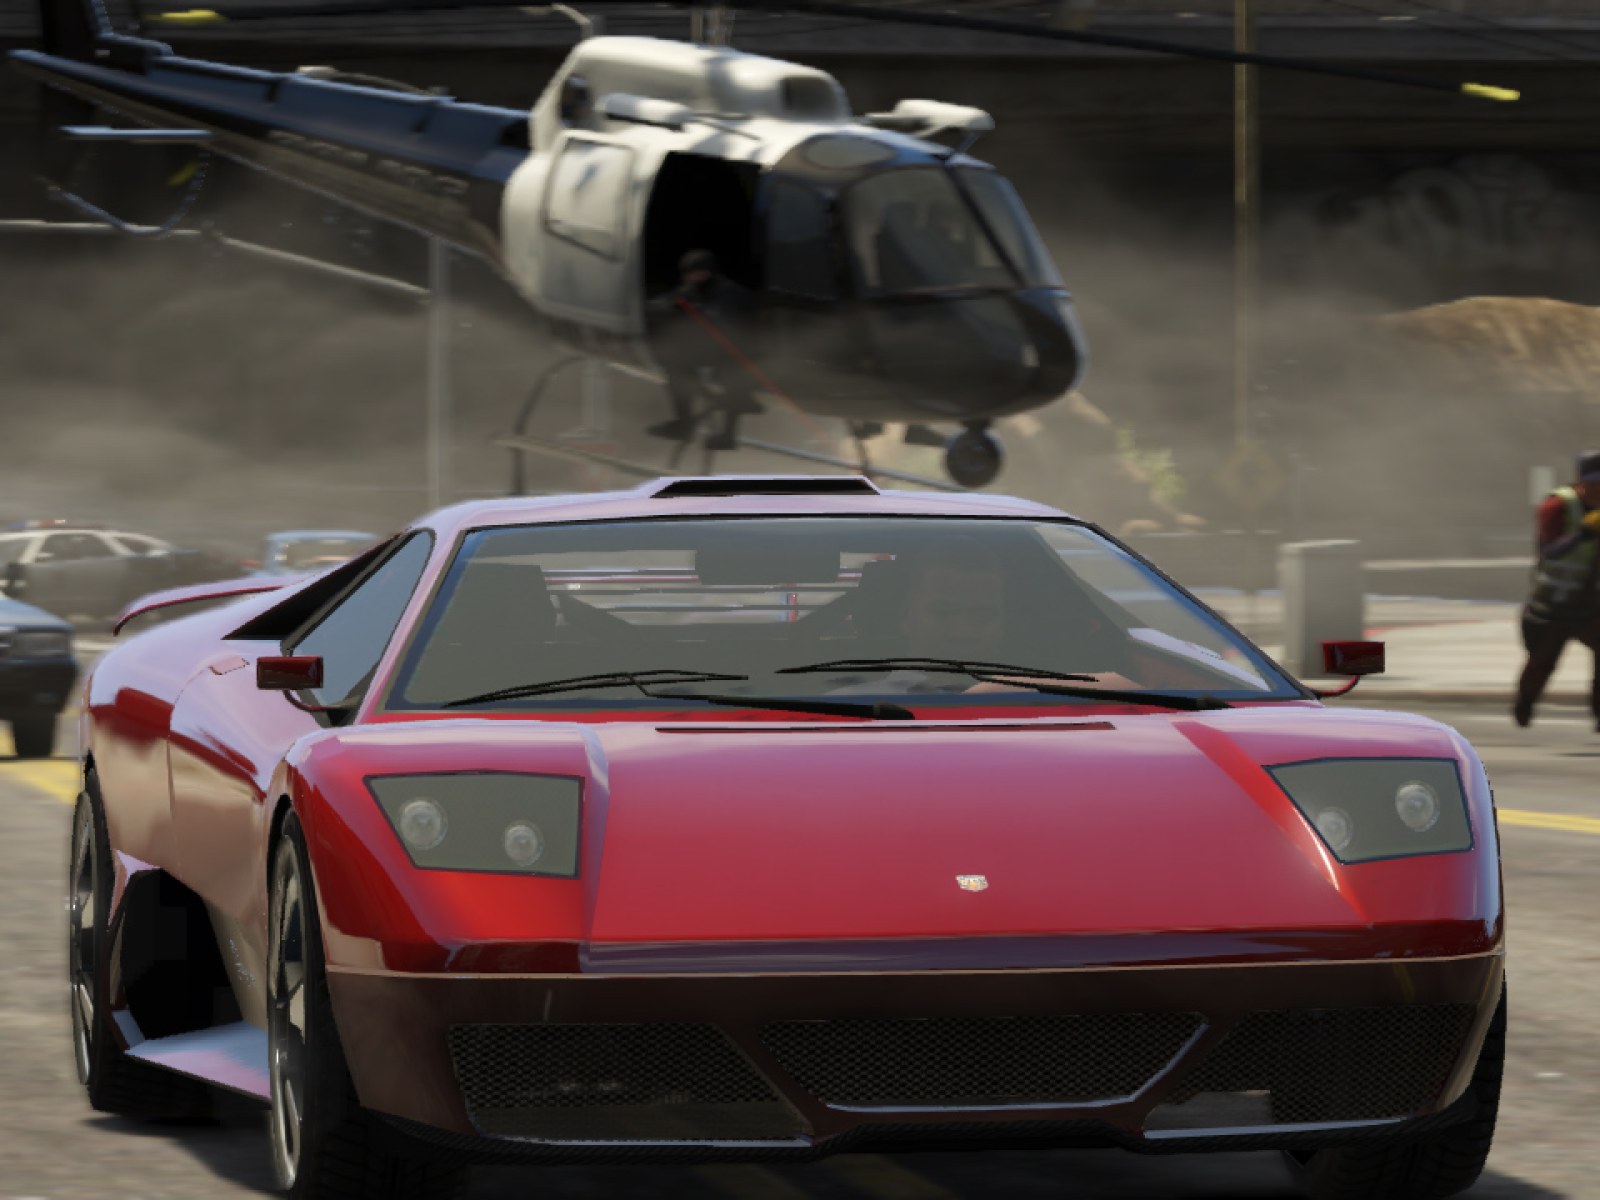 GTA 6 Leaks May Have Come From Rockstar Employee's Kid: Report